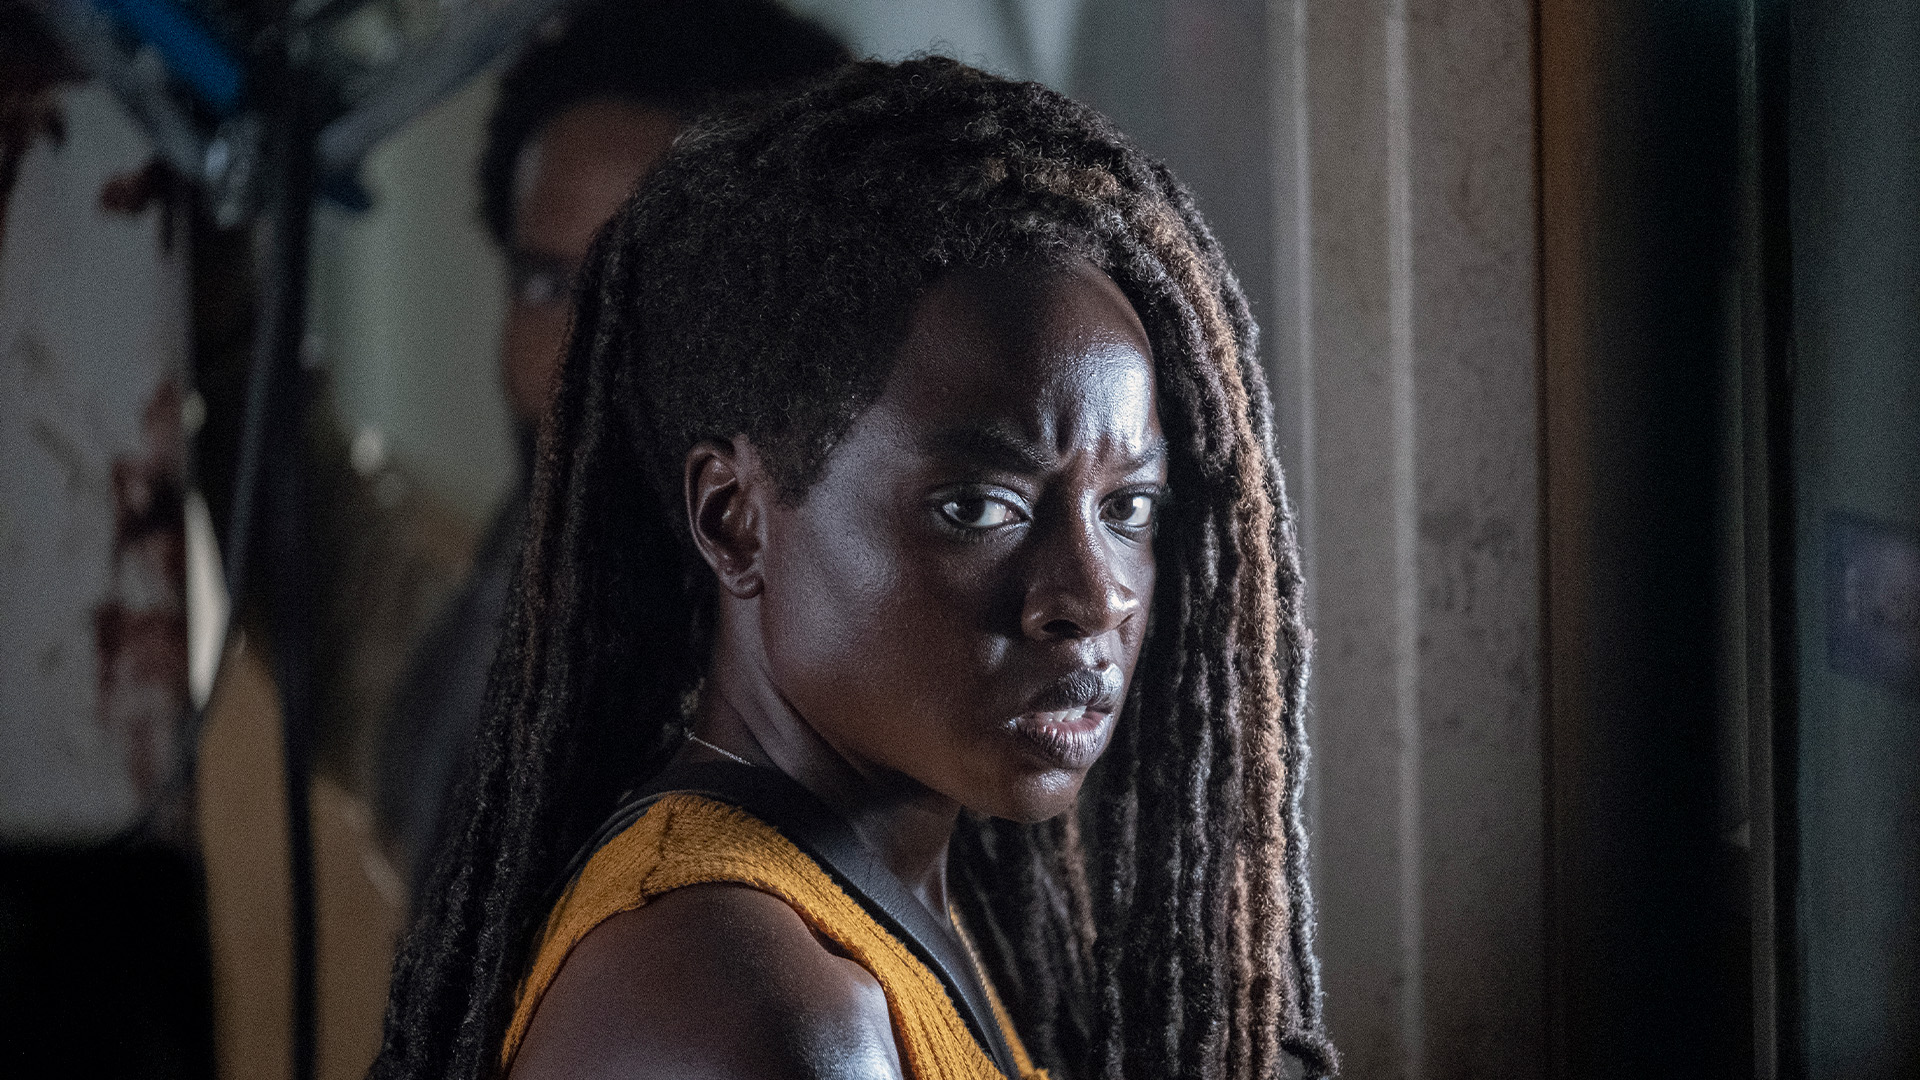 What We Become: Best of Michonne Edition, Relive Michonne's best moments in this iconic episode from Season 10., Season 1066703, Episode 6